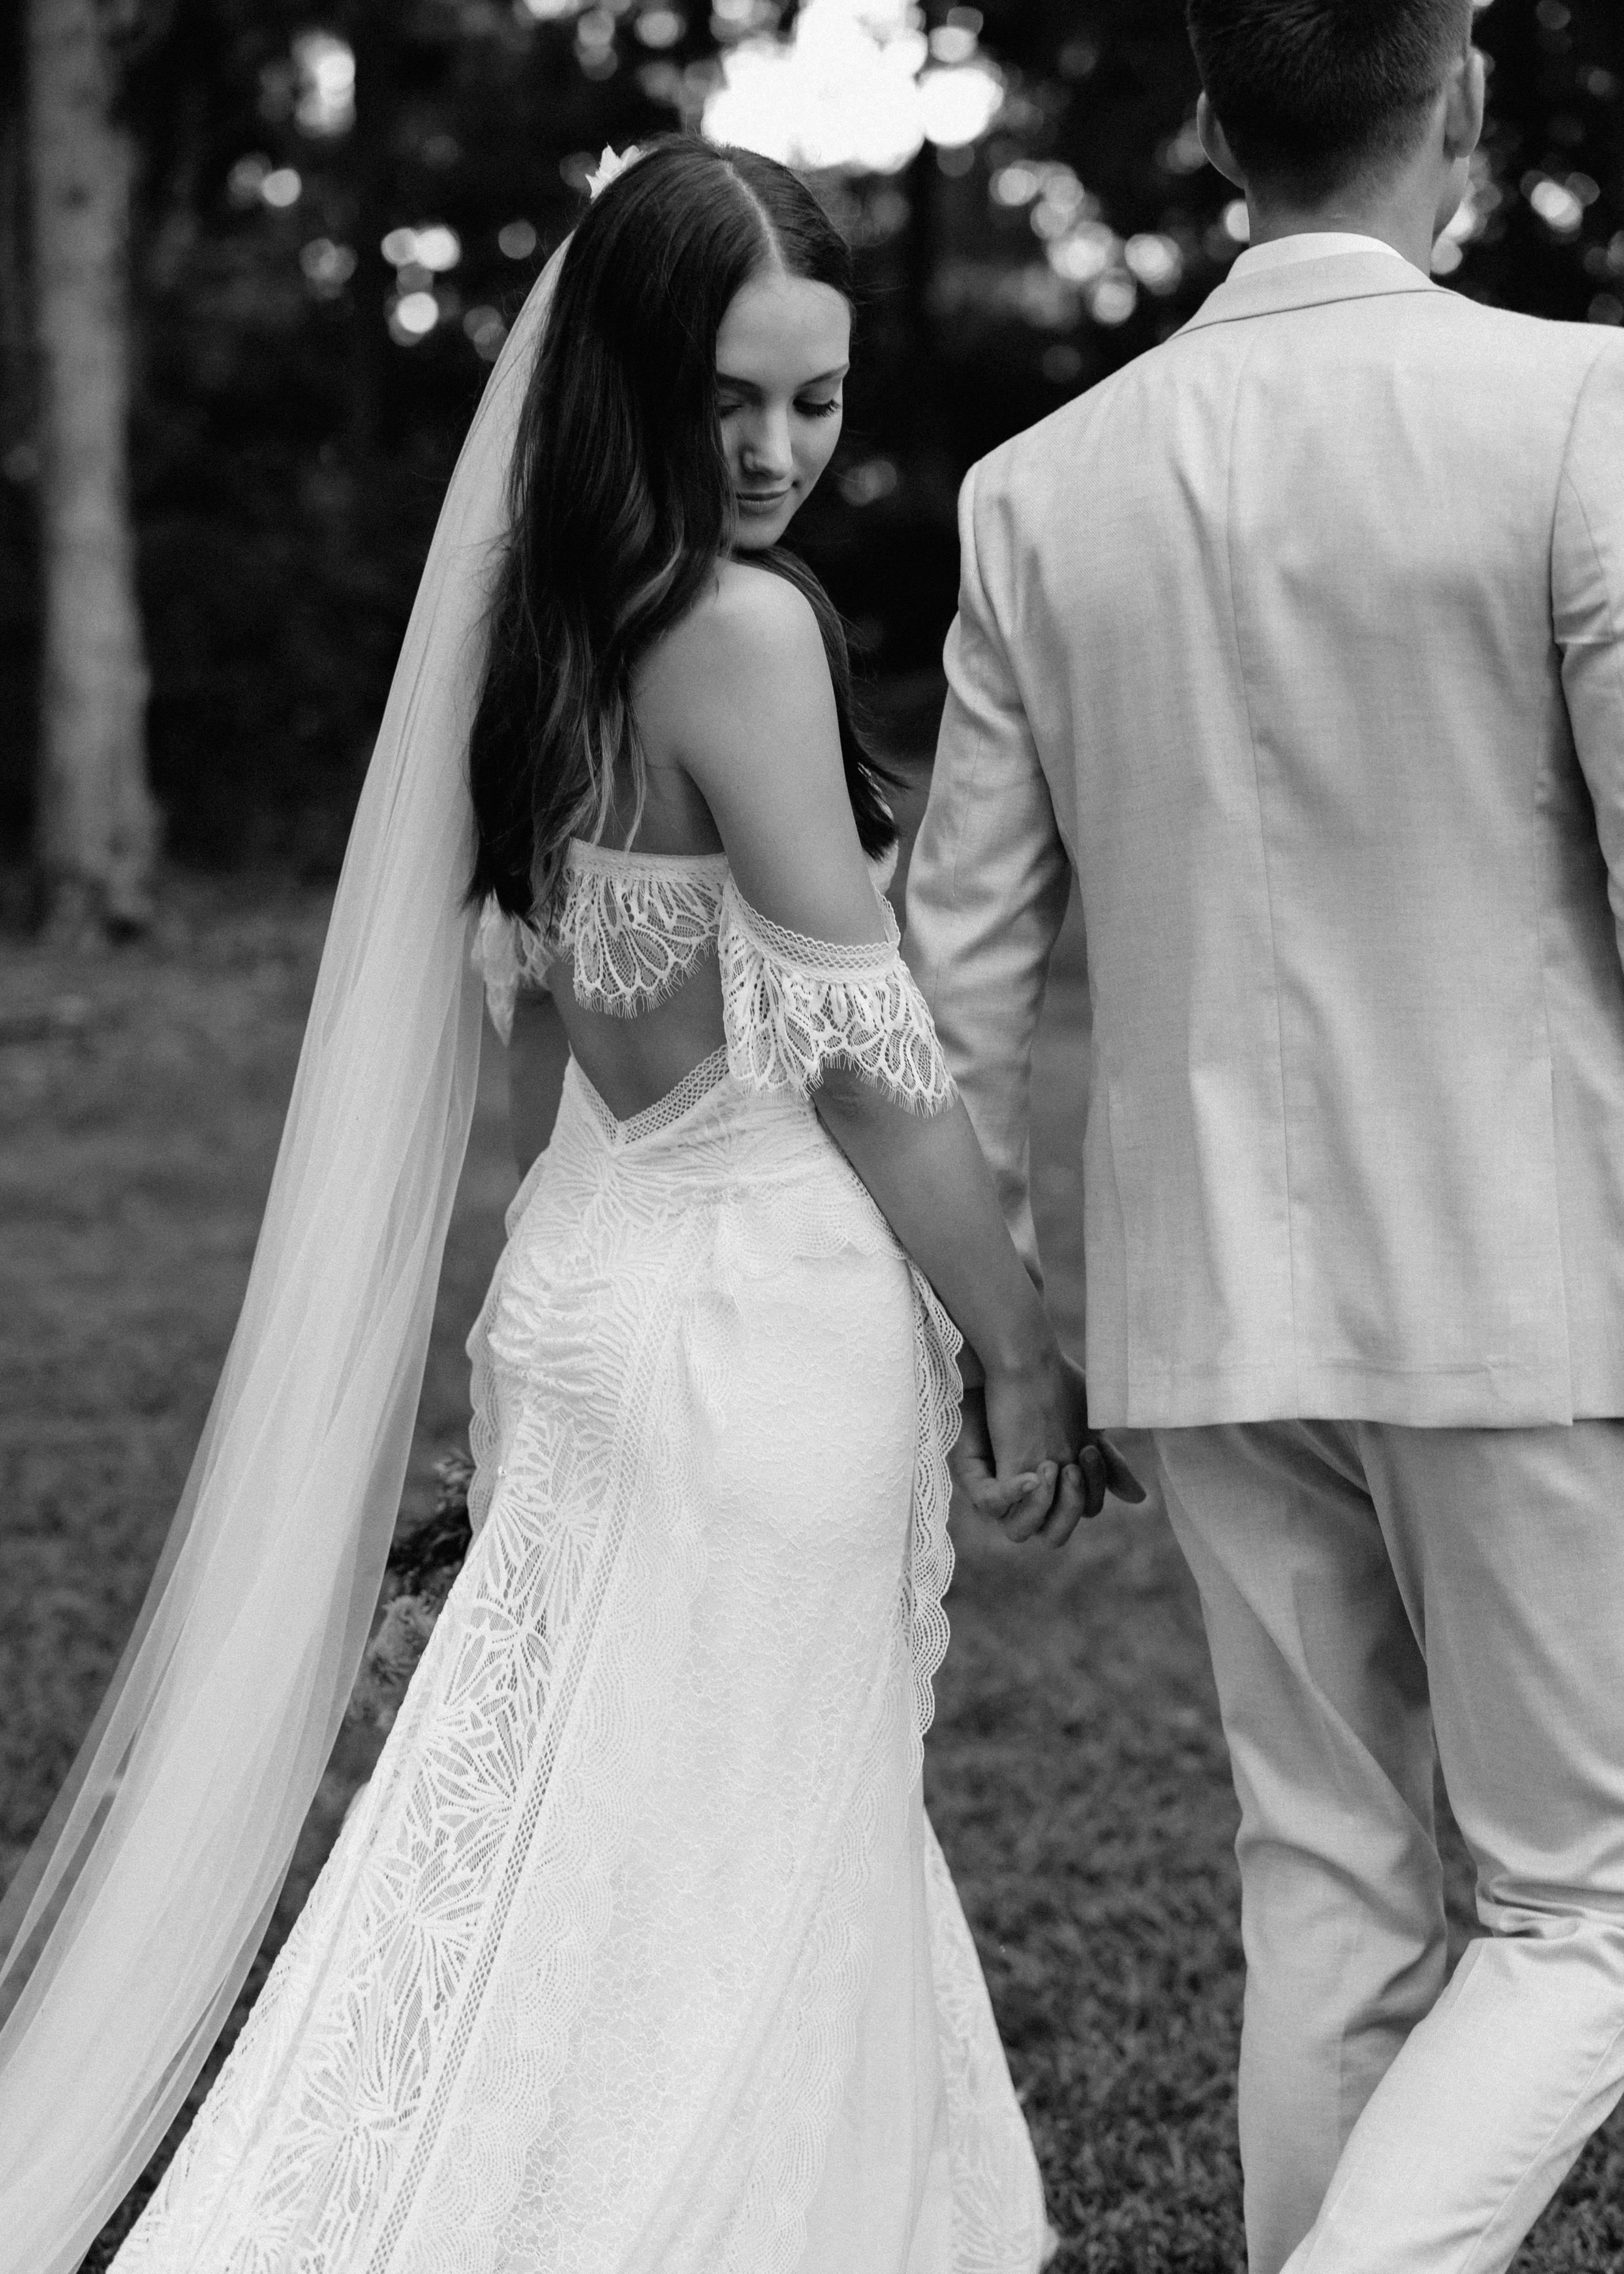 A bride and groom walk hand-in-hand through a grassy area. The bride, in a detailed lace gown and veil, glances back over her shoulder with a soft smile. The groom, dressed in a light-colored suit, faces forward. The monochrome image captures a serene, romantic moment.